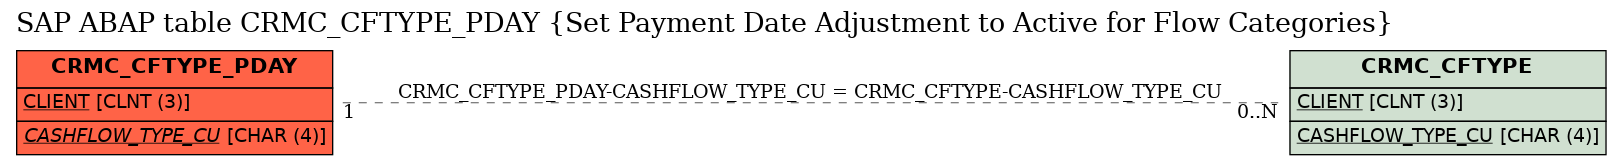 E-R Diagram for table CRMC_CFTYPE_PDAY (Set Payment Date Adjustment to Active for Flow Categories)